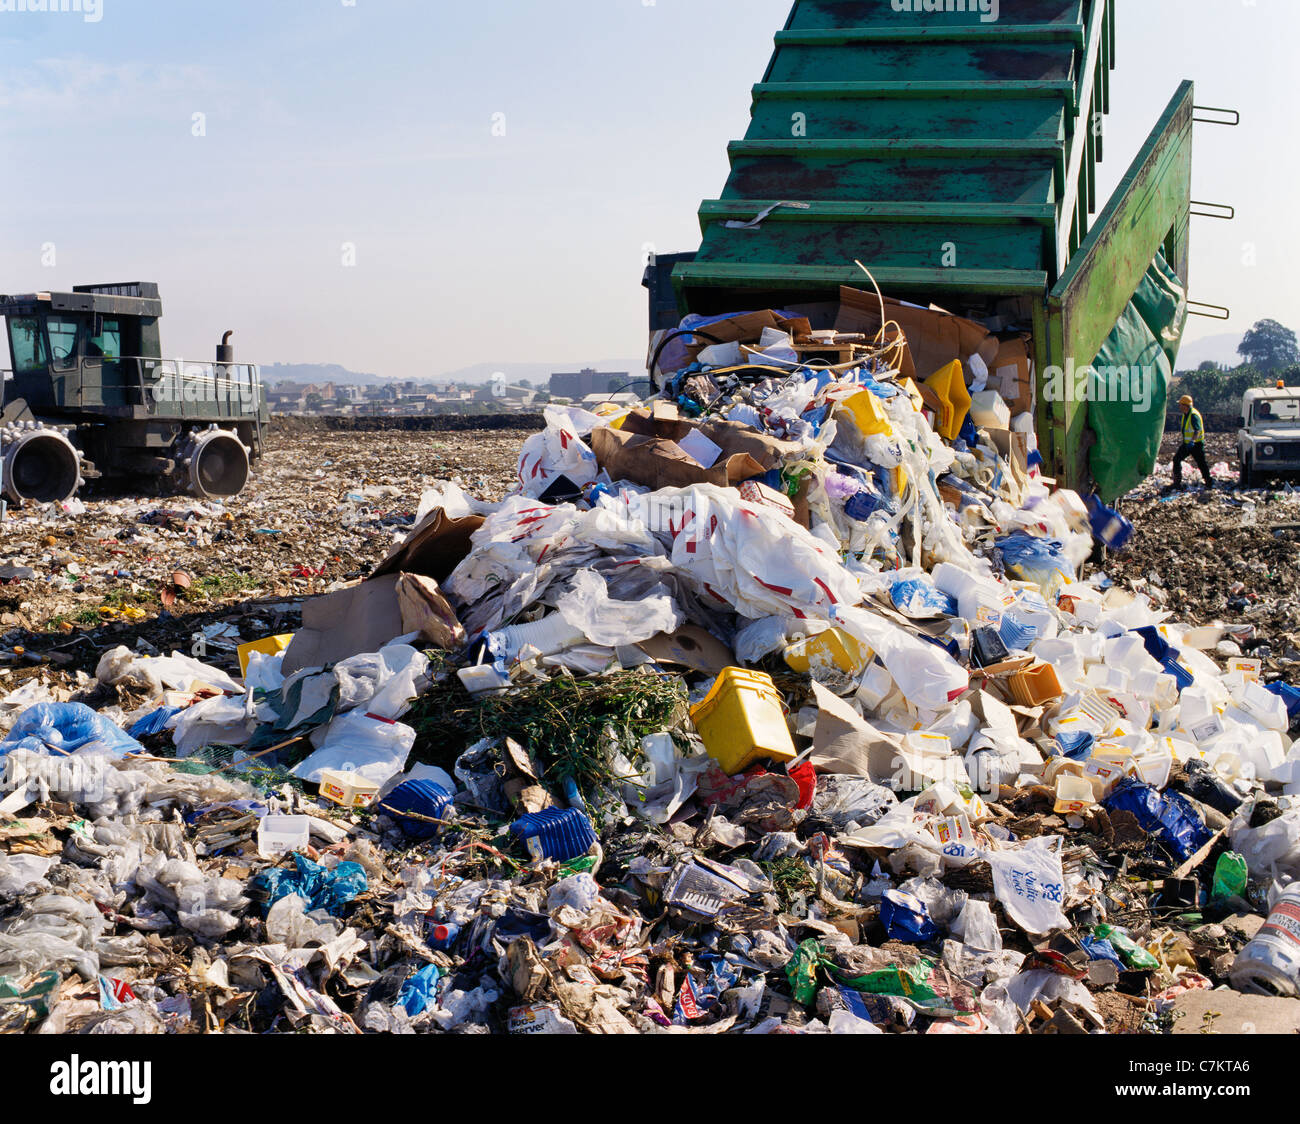 Landfill waste disposal site at Hempsted, Gloucester UK Stock Photo